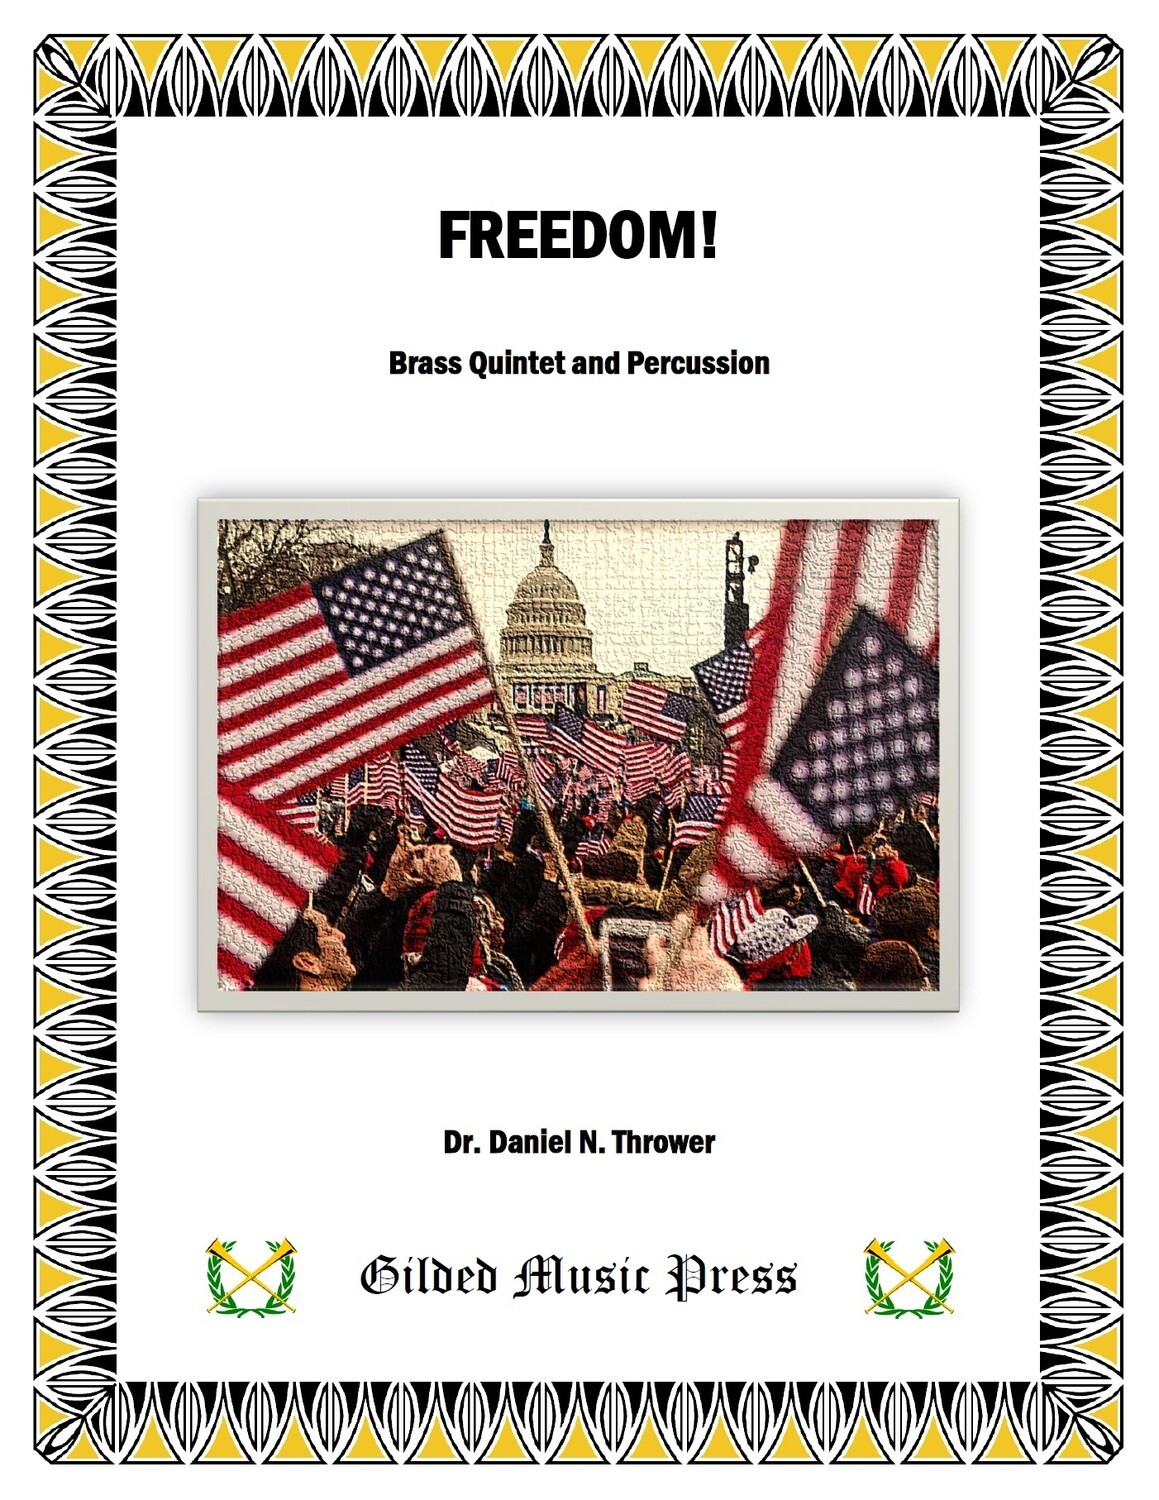 GMP 3045: Freedom! (Brass Quintet & Percussion), Dr. Daniel Thrower